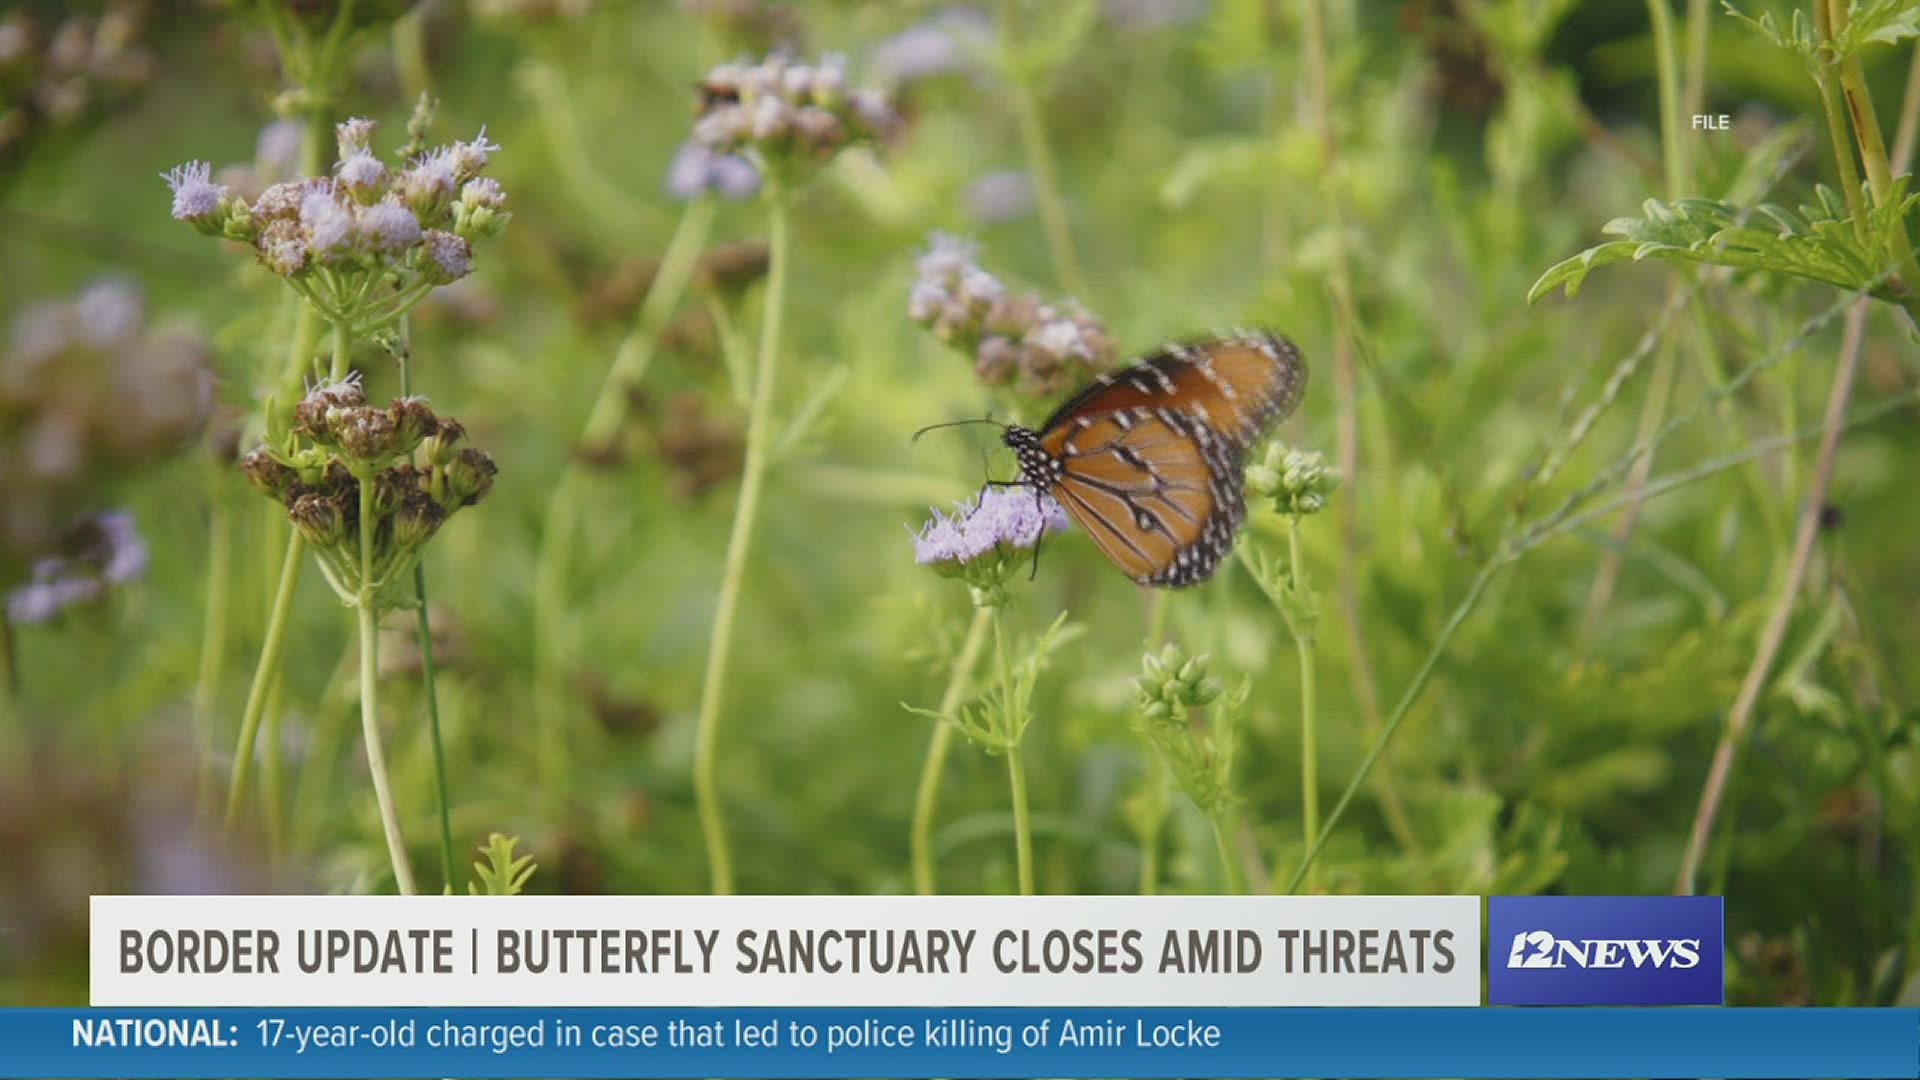 The National Butterfly Center in Mission Texas would usually be open at this time of year.